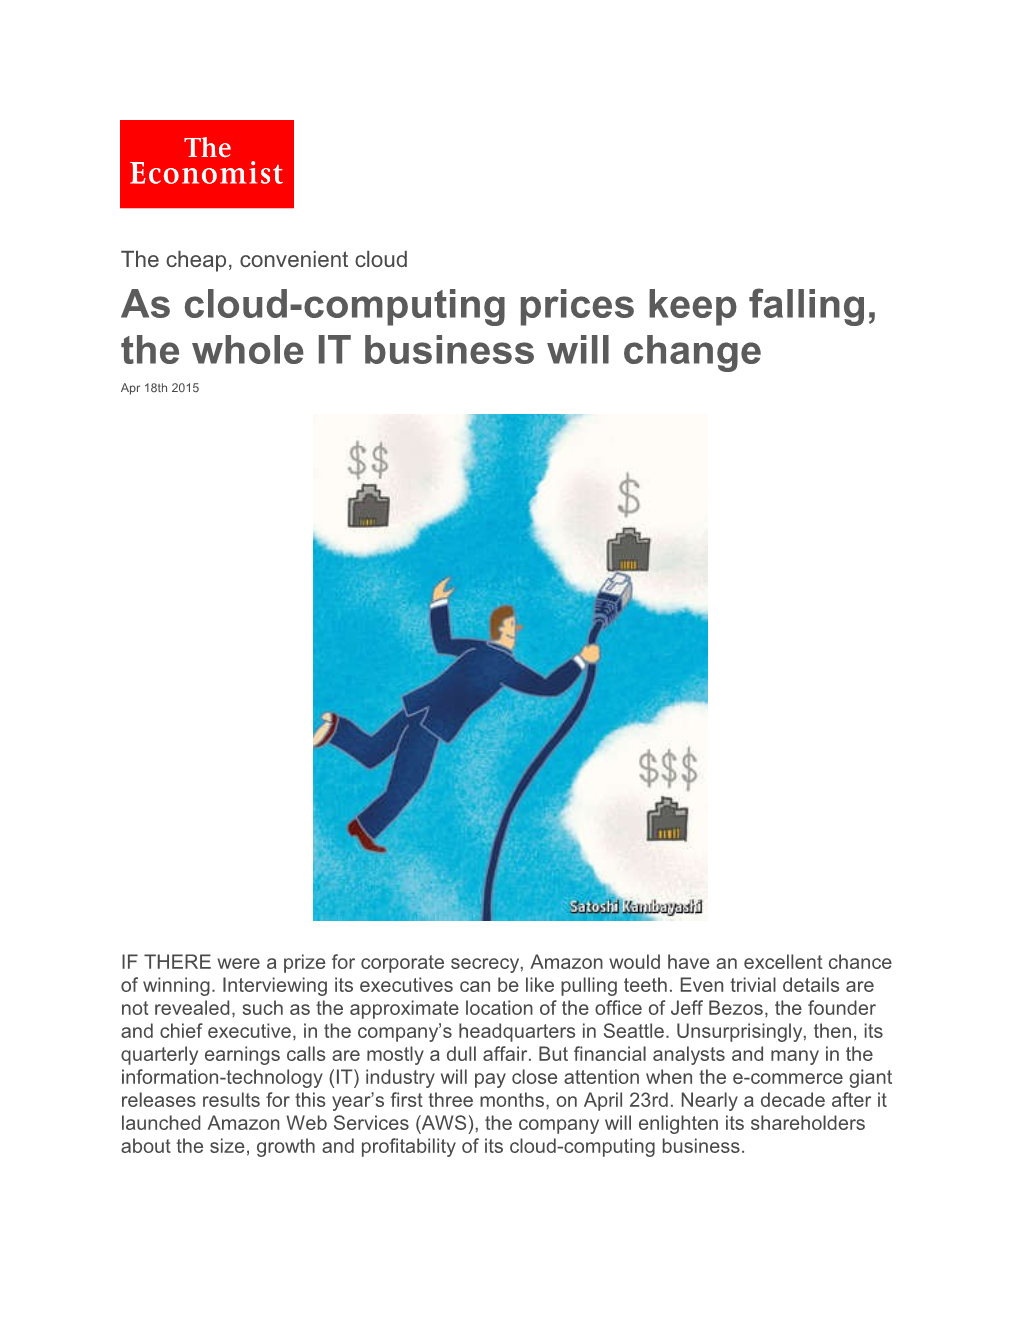 As Cloud-Computing Prices Keep Falling, the Whole IT Business Will Change